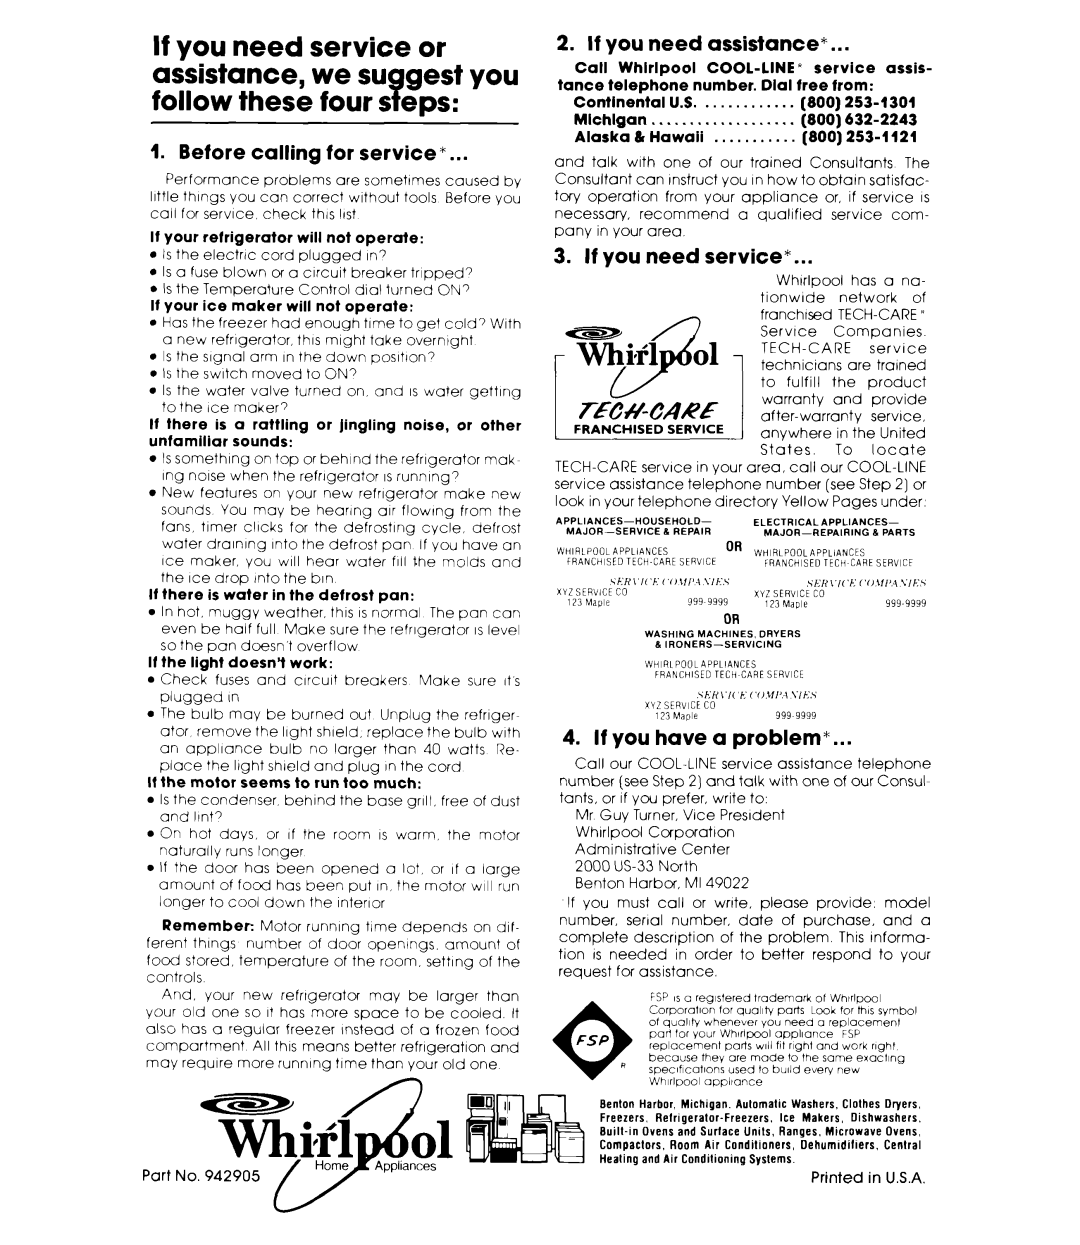 Whirlpool ET16JKXL warranty Before calling for service, If you need assistance, If you need service, If you have a problem 